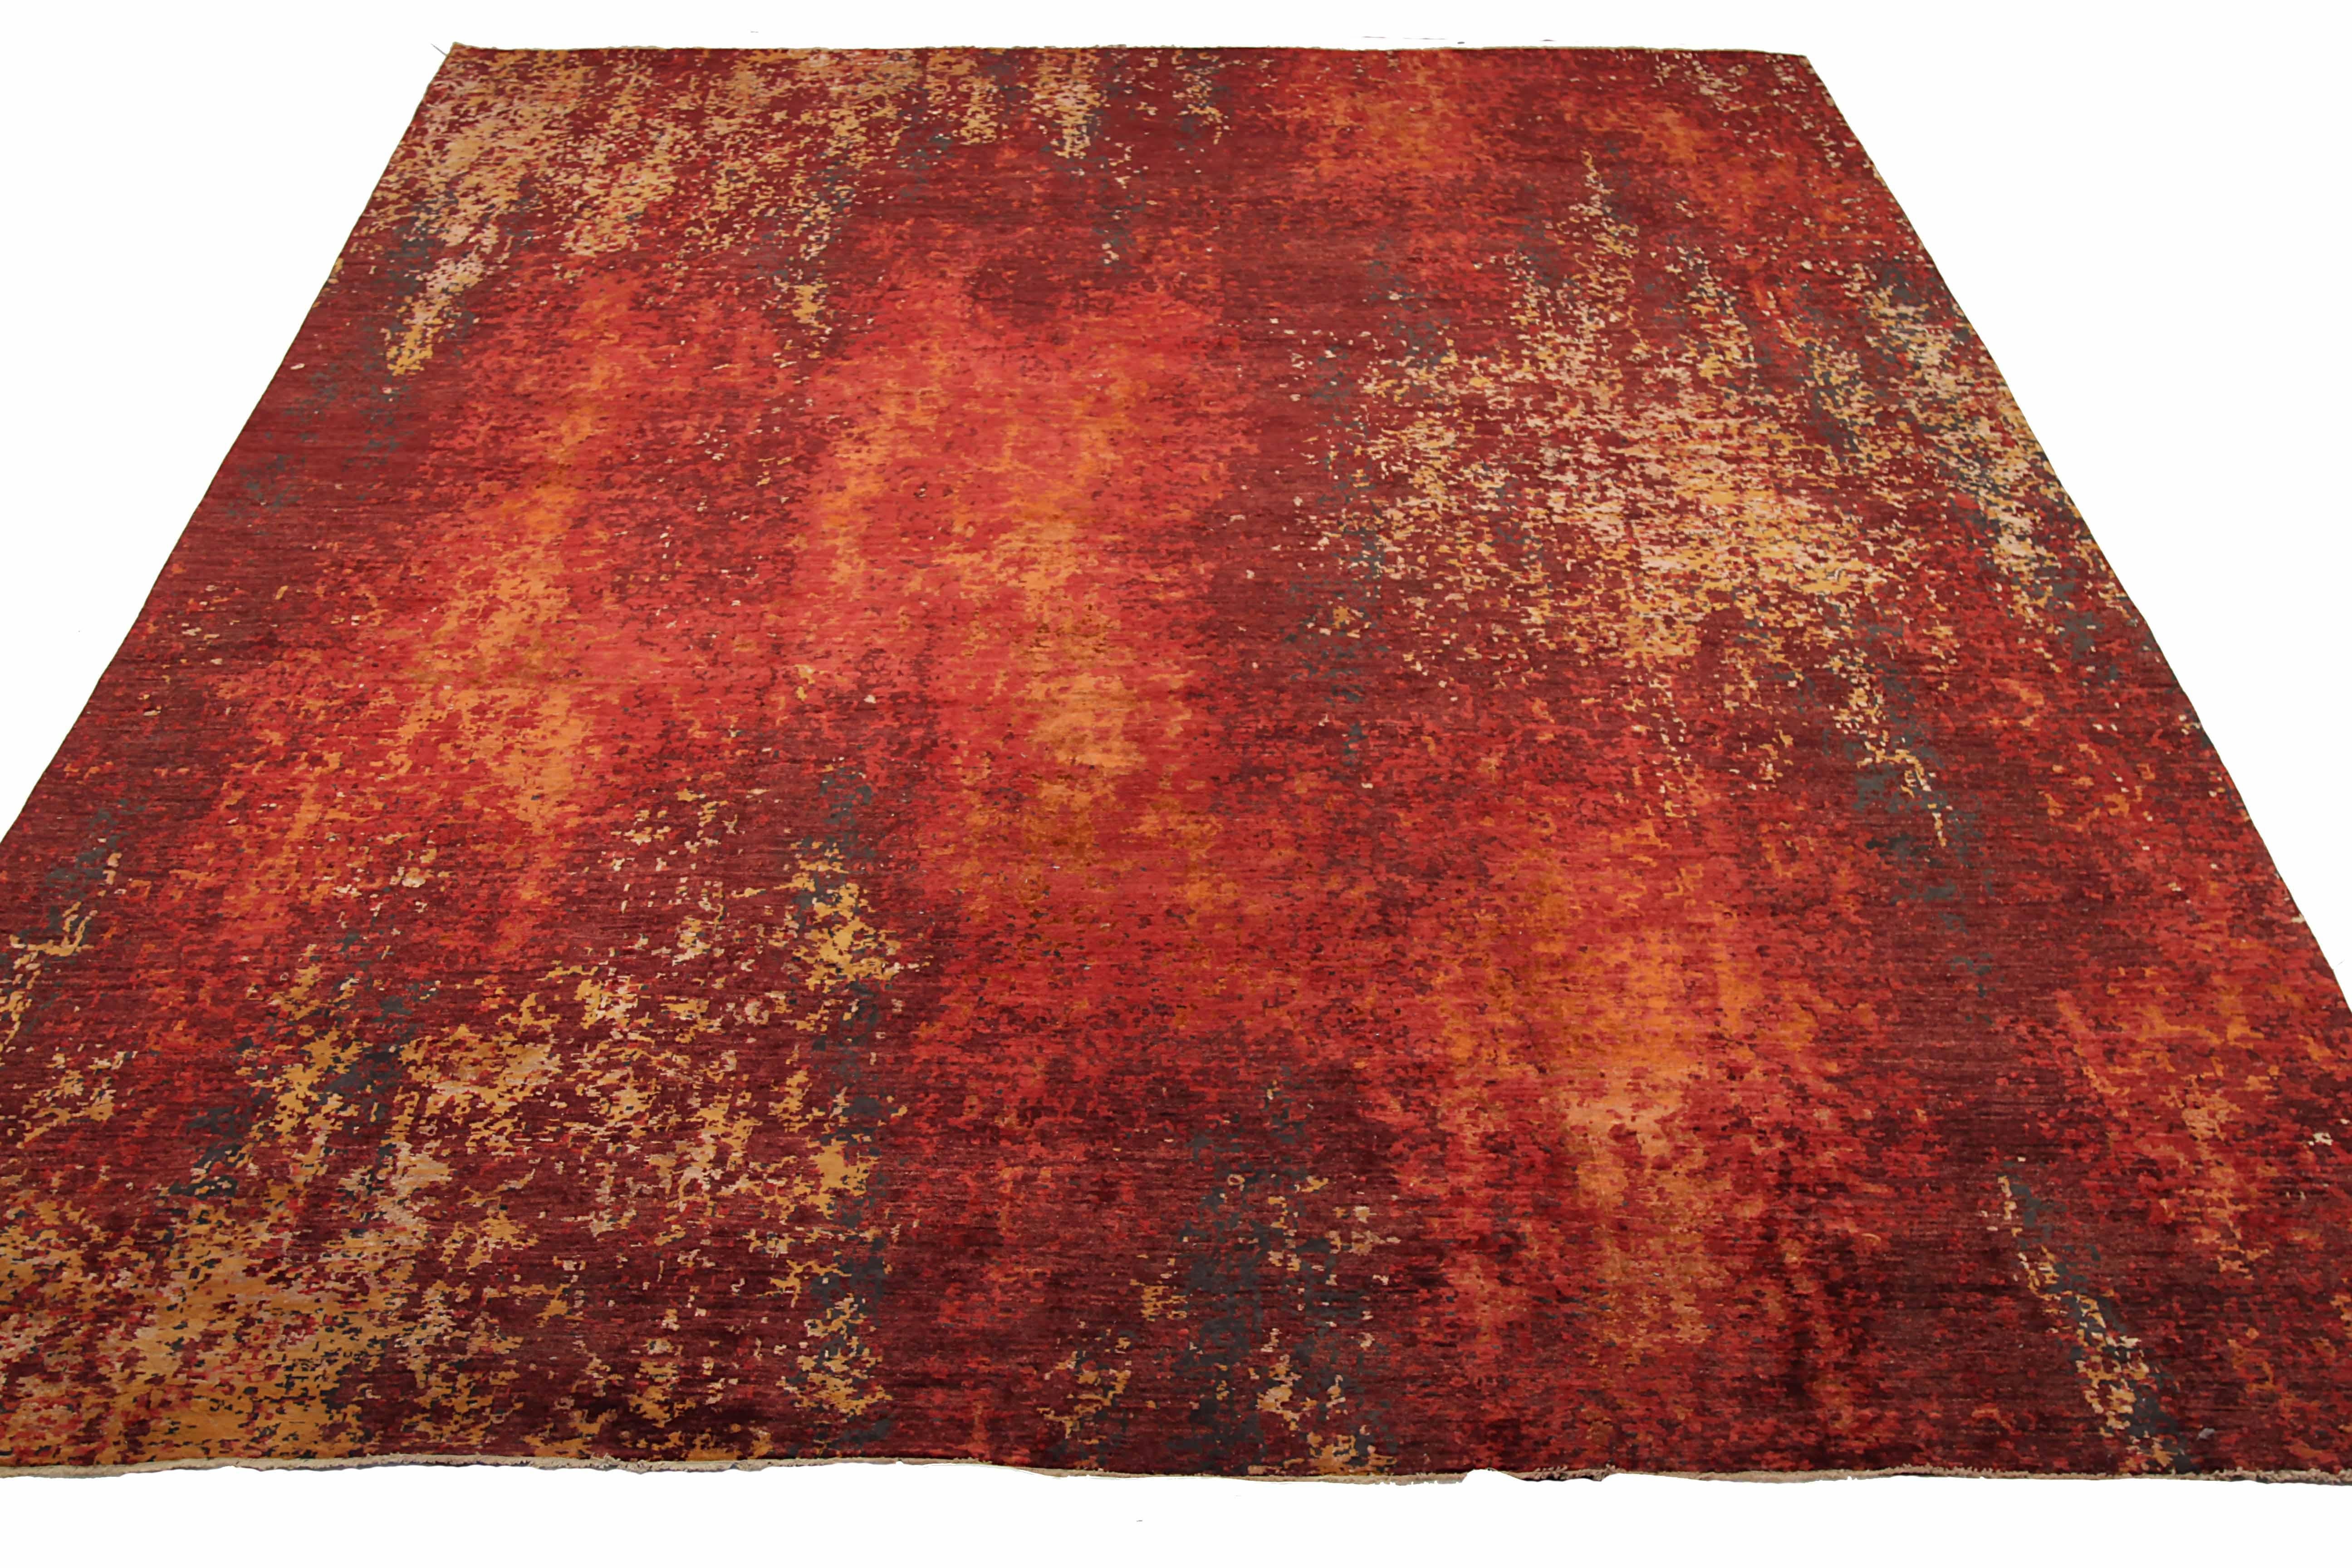 New area rug handwoven from the finest sheep’s wool. It’s colored with all-natural vegetable dyes that are safe for humans and pets. It’s a traditional Modern design handwoven by expert artisans. It’s a lovely area rug that can be incorporated with